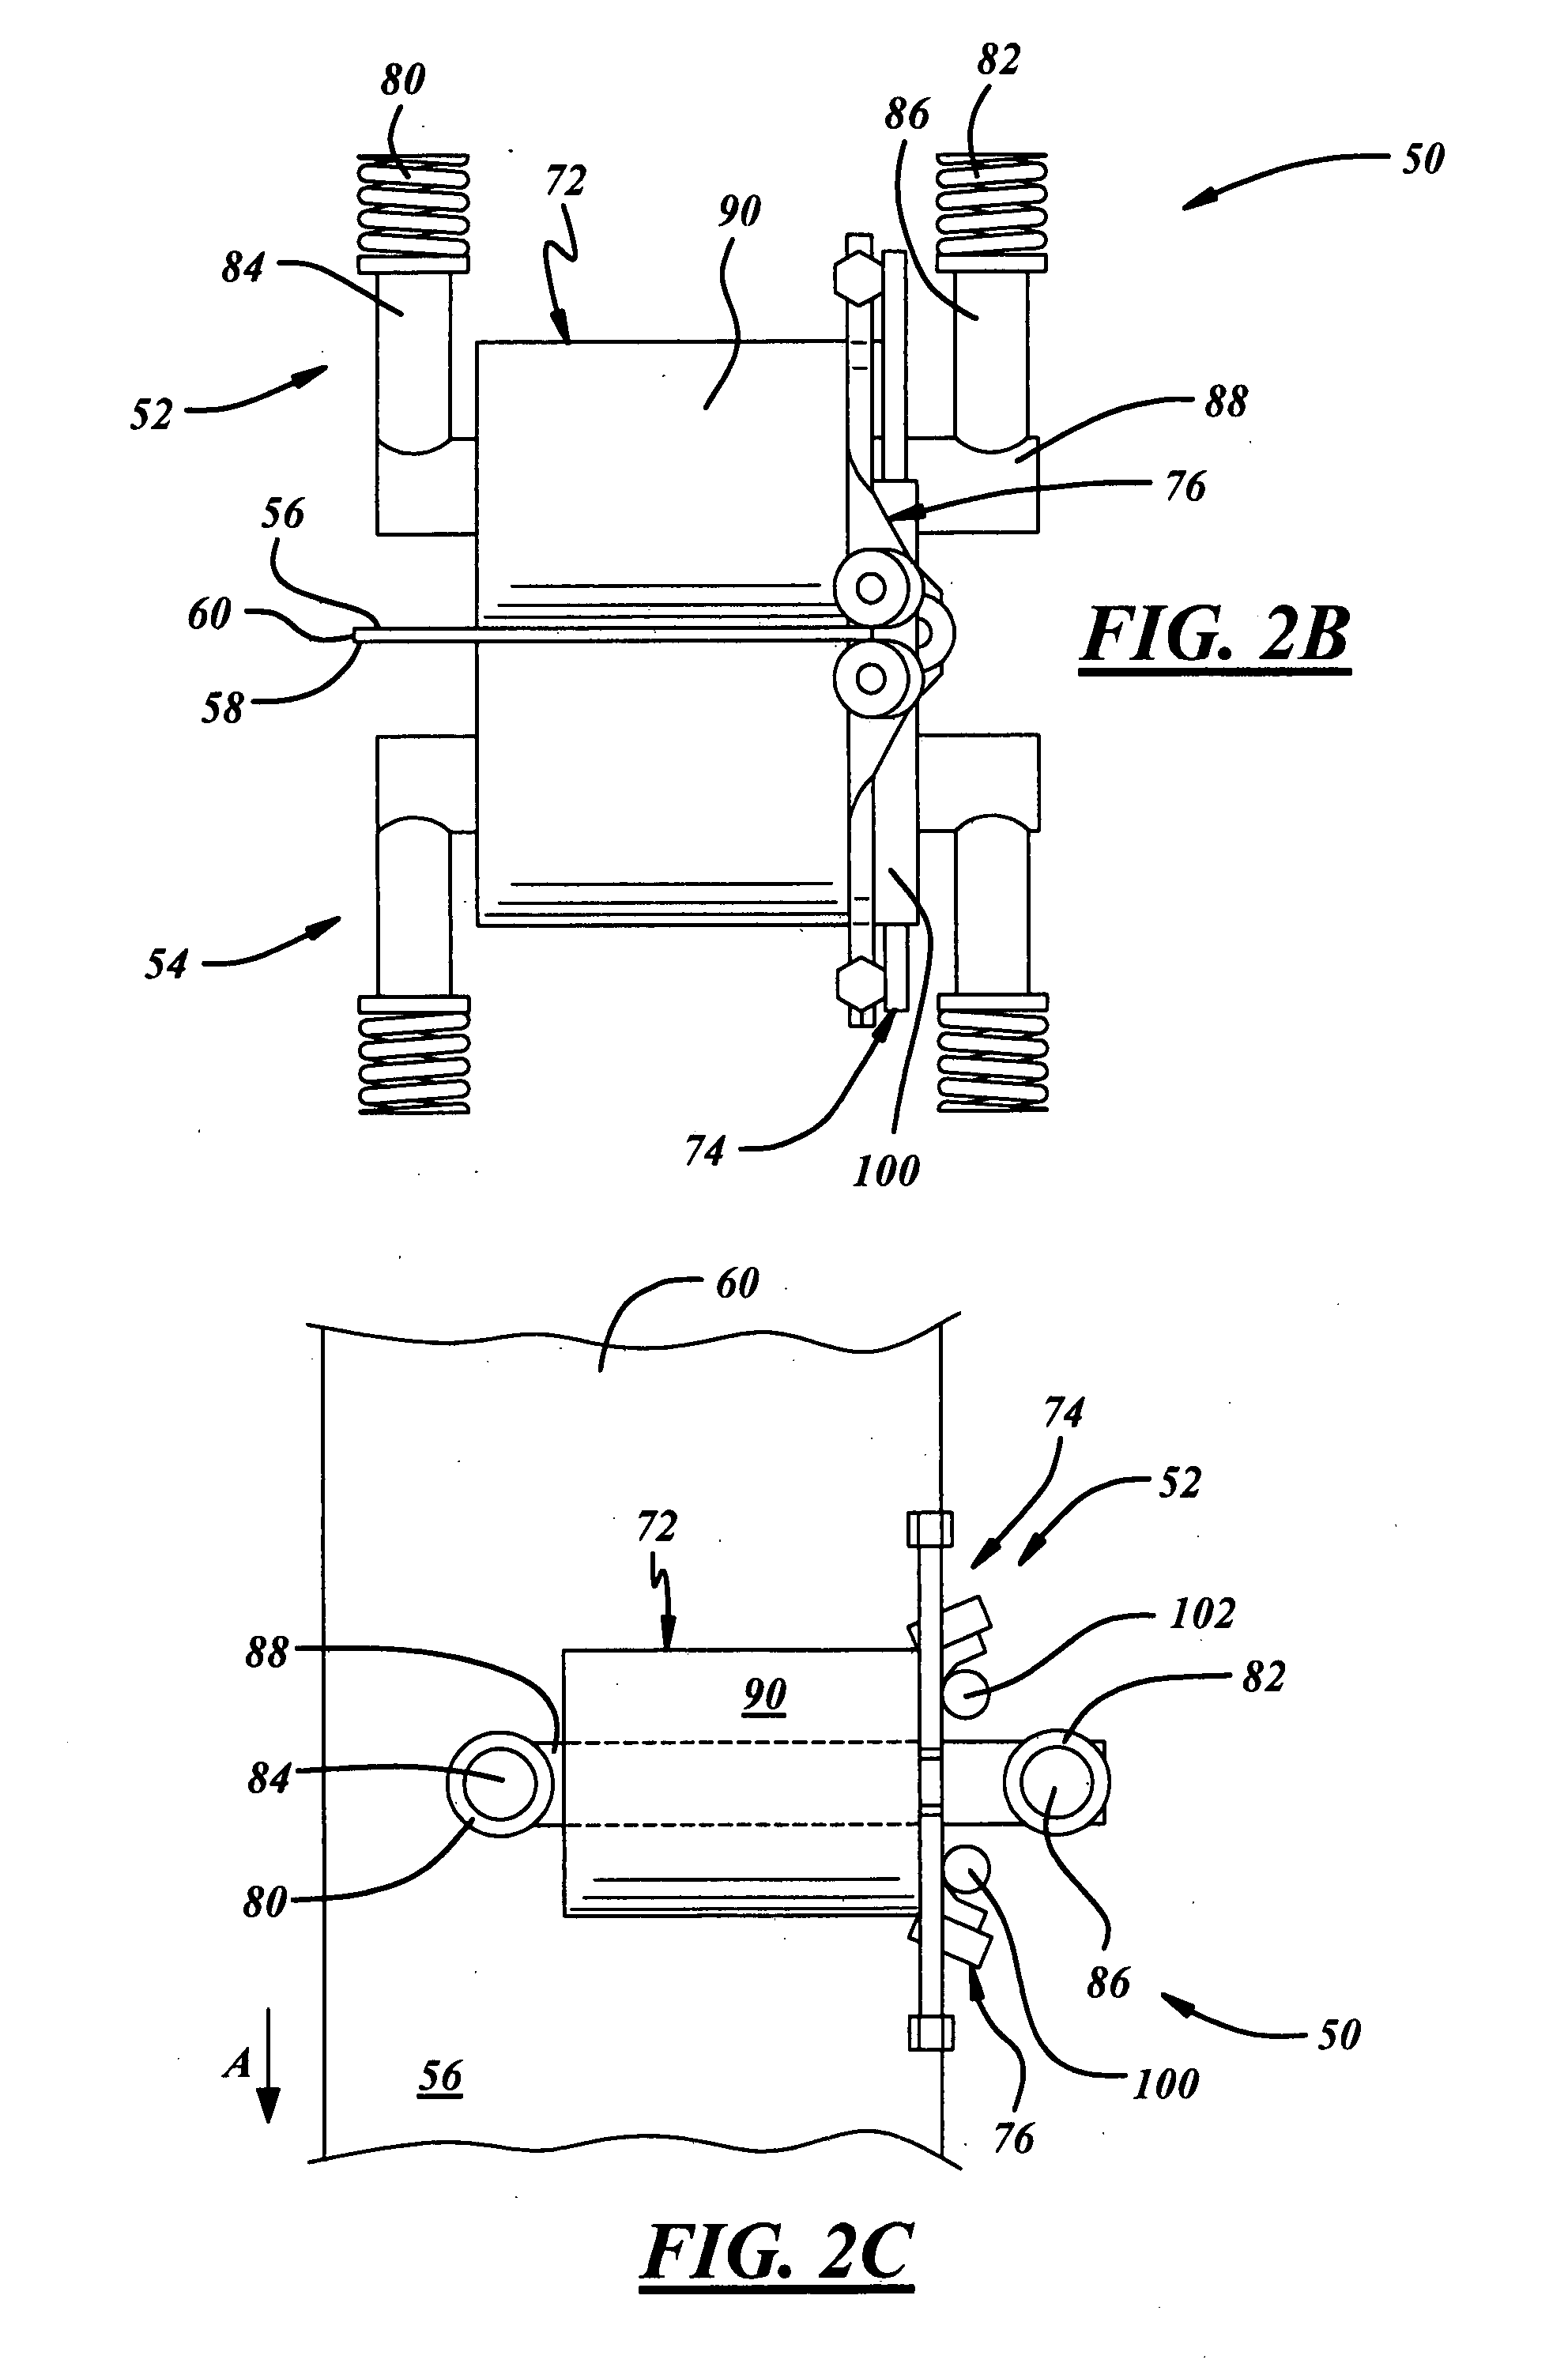 Scraper tool for removing material from a surface of a metal work piece